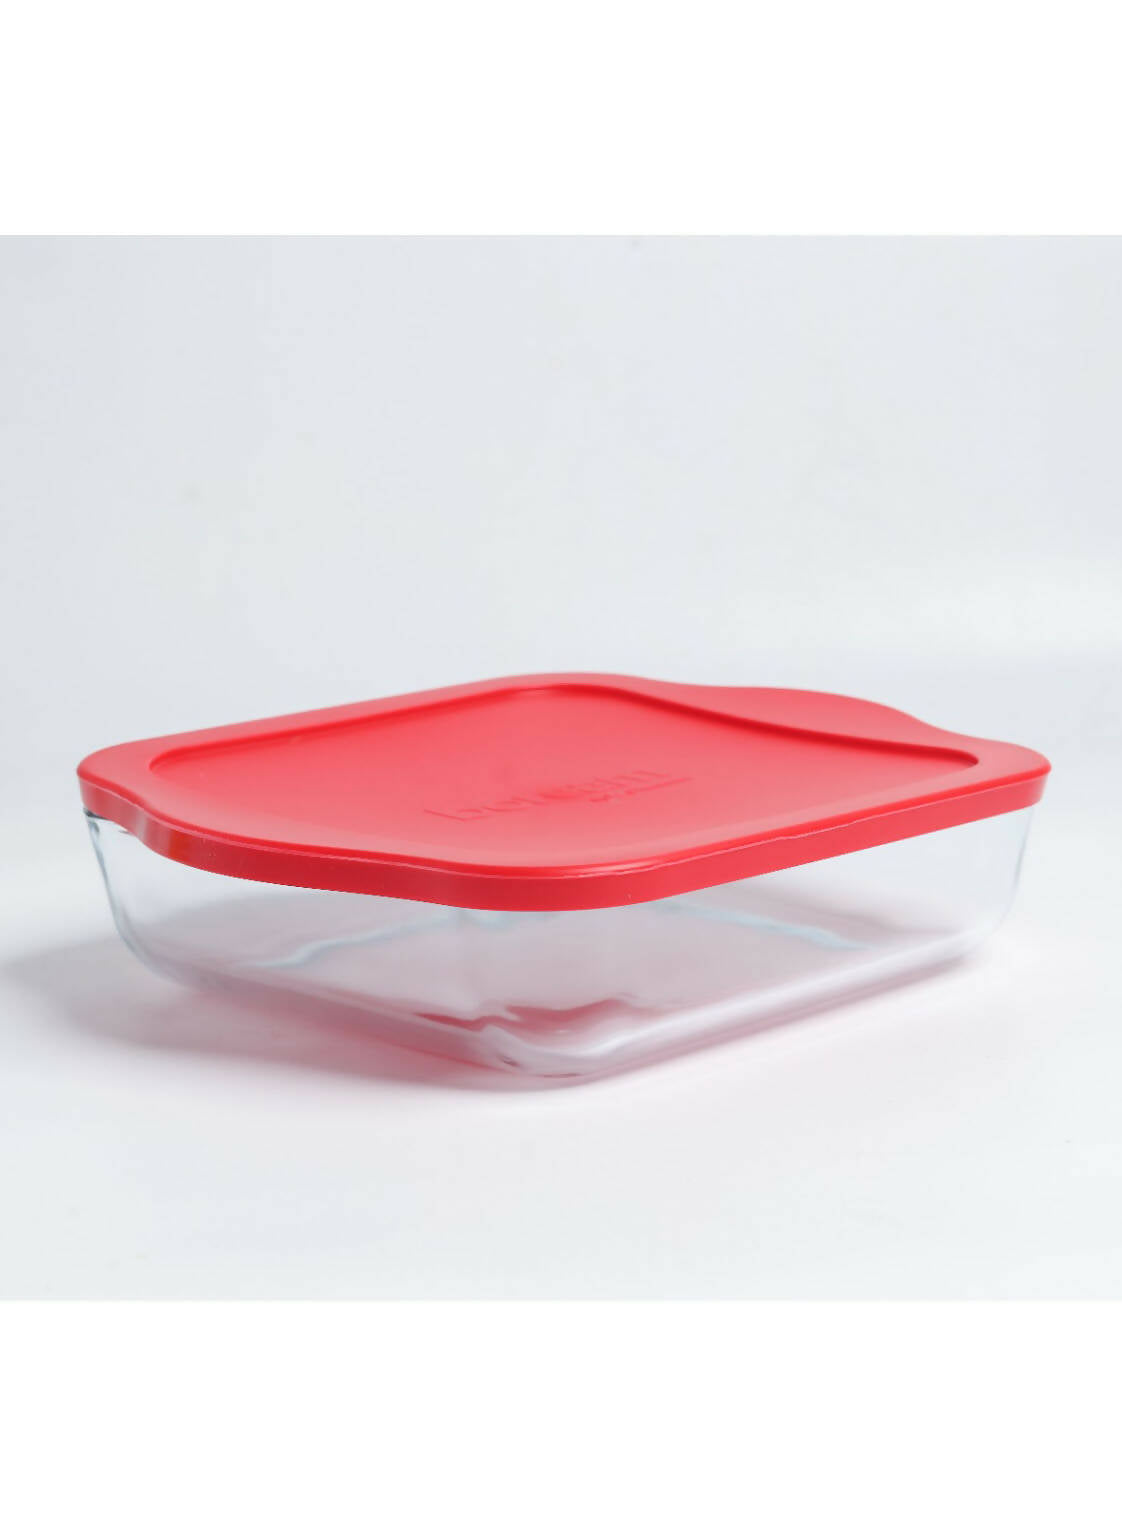 Birex Square Glass With An Airtight Silicone Lid